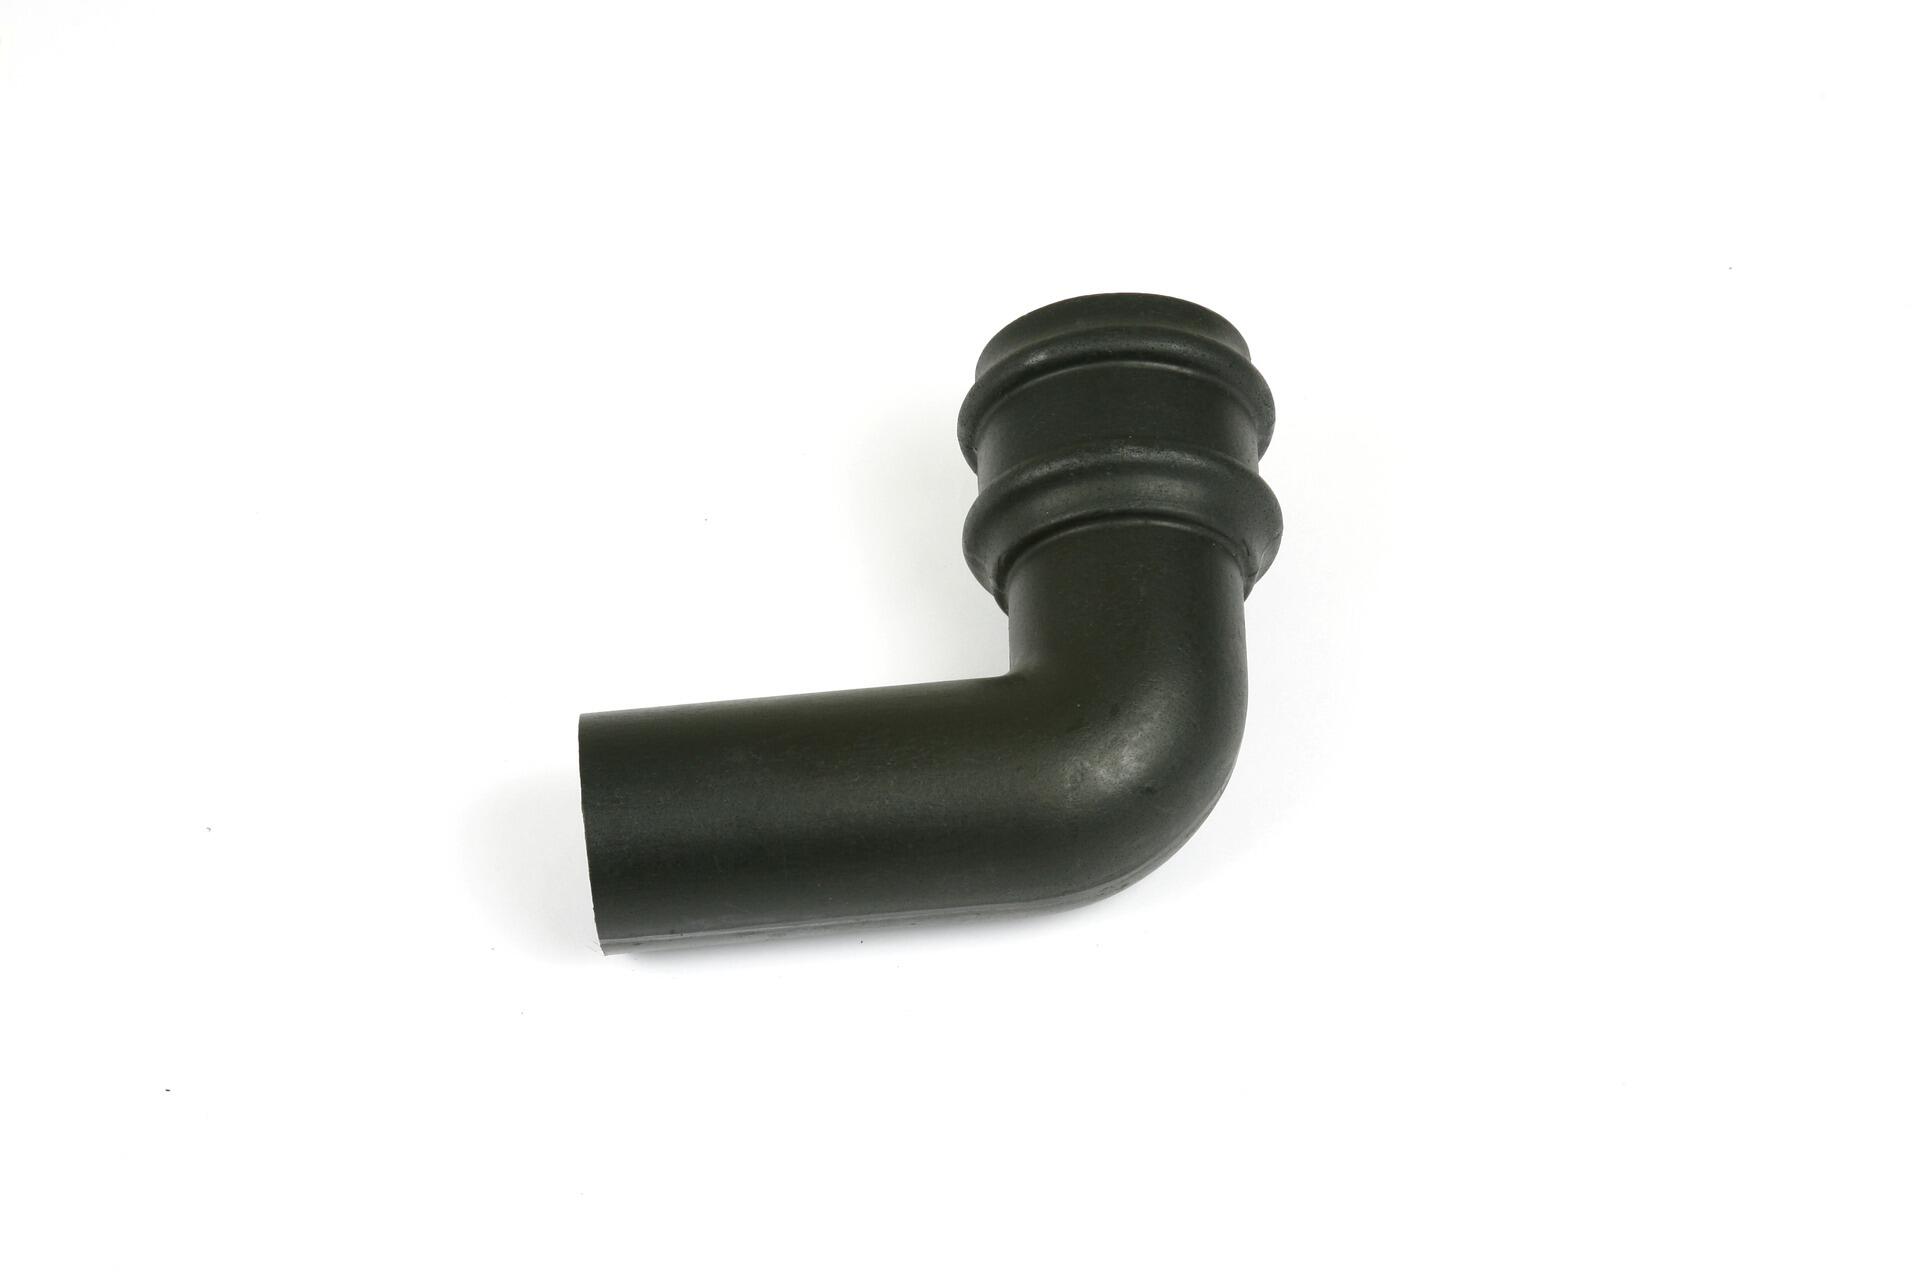 Cascade 92.5DEG Bend For Round Downpipe 68mm - Plastic Drainage